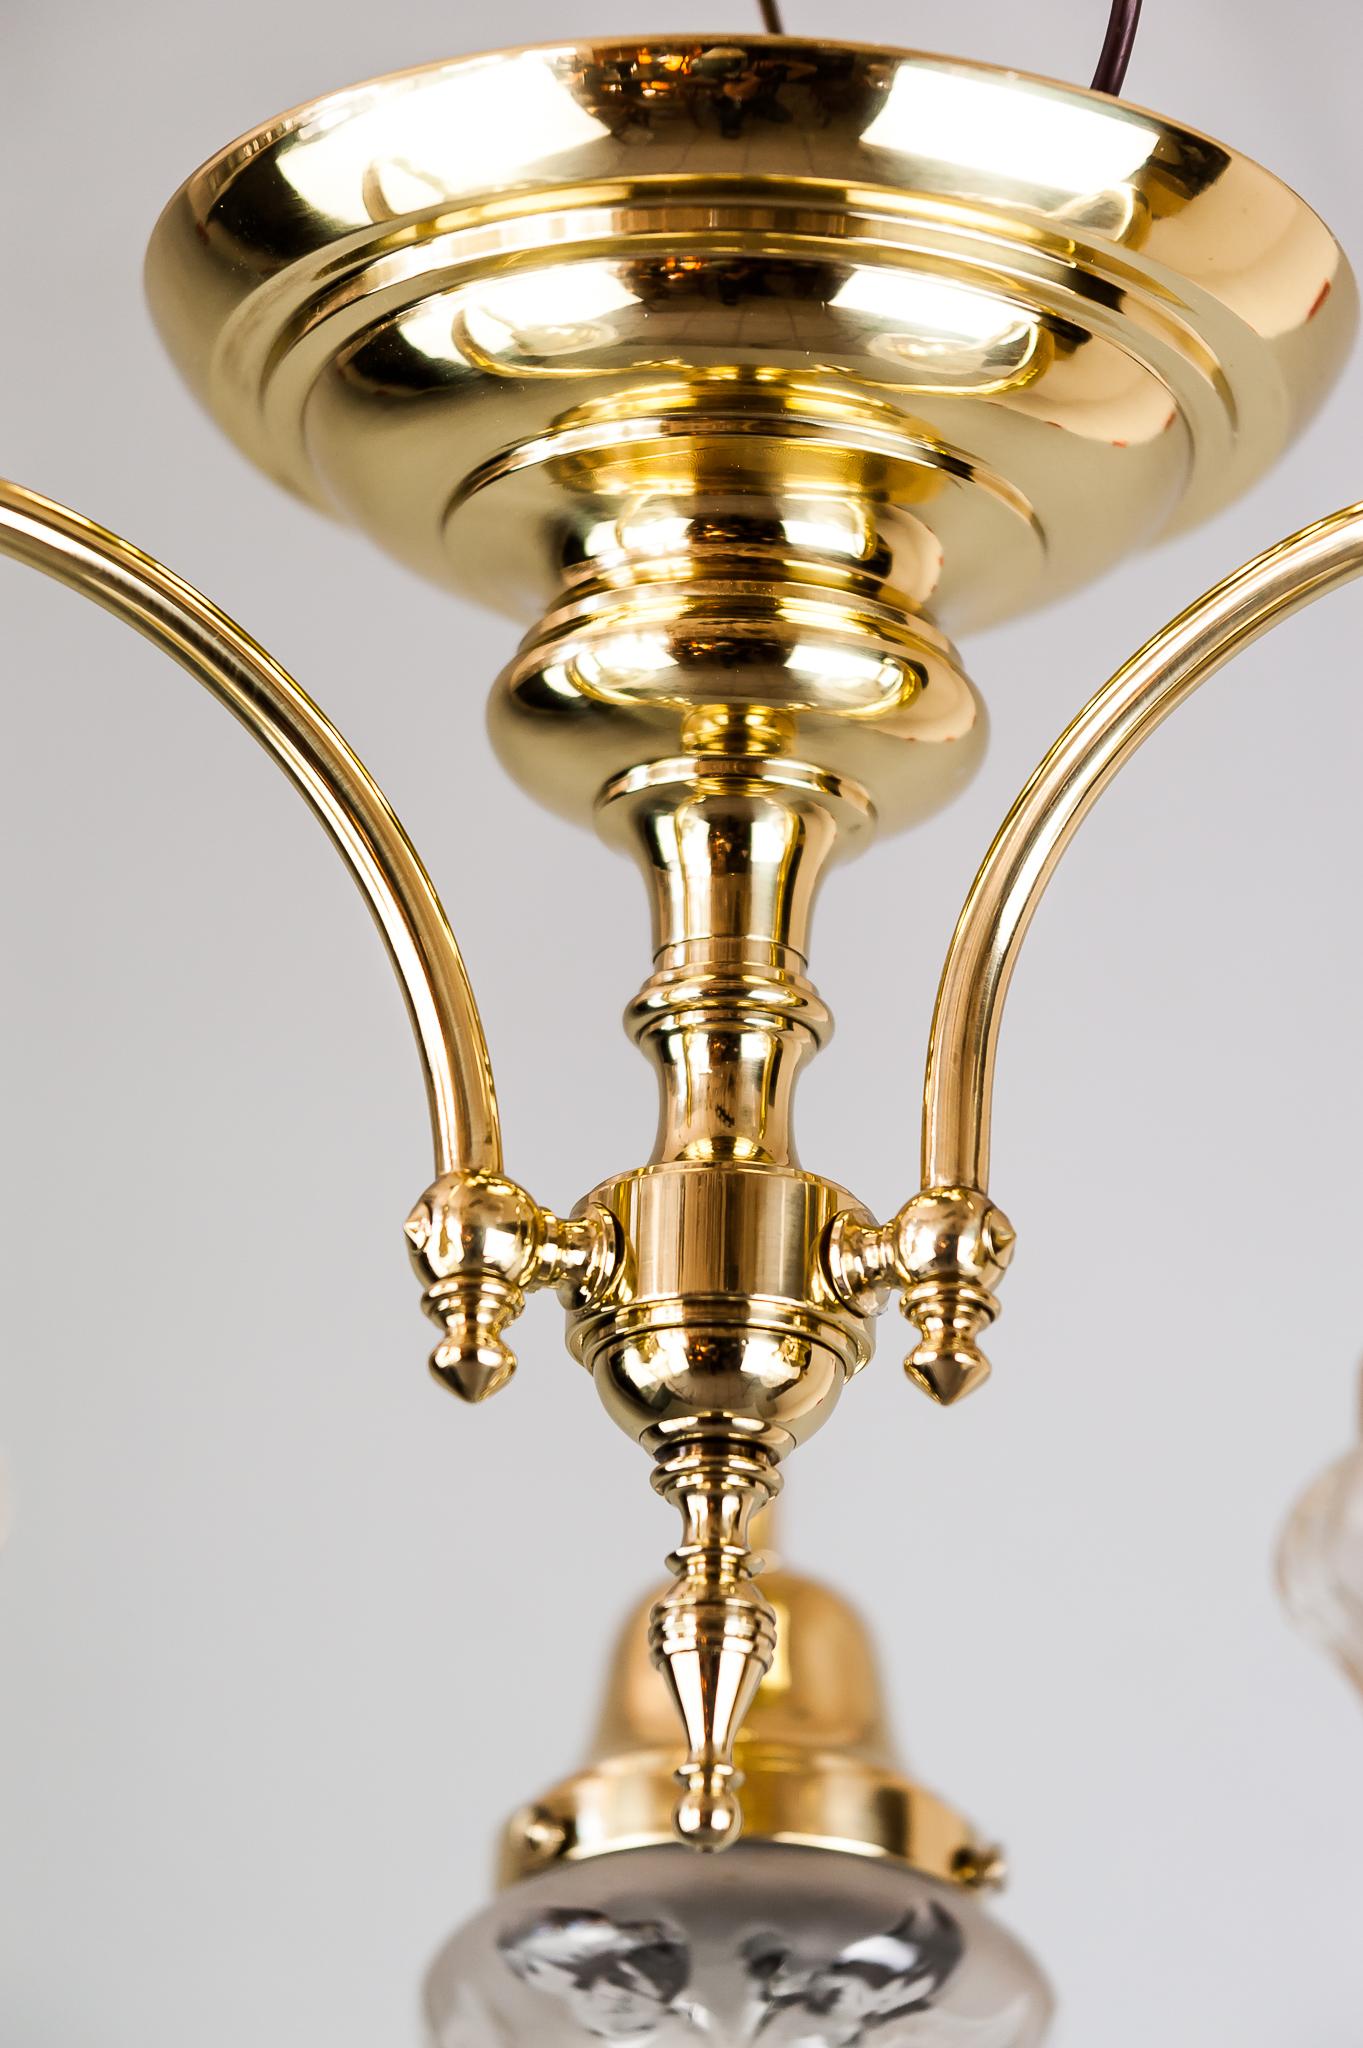 Lacquered Jugendstil Ceiling Lamp, circa 1908 with Original Glass Shades